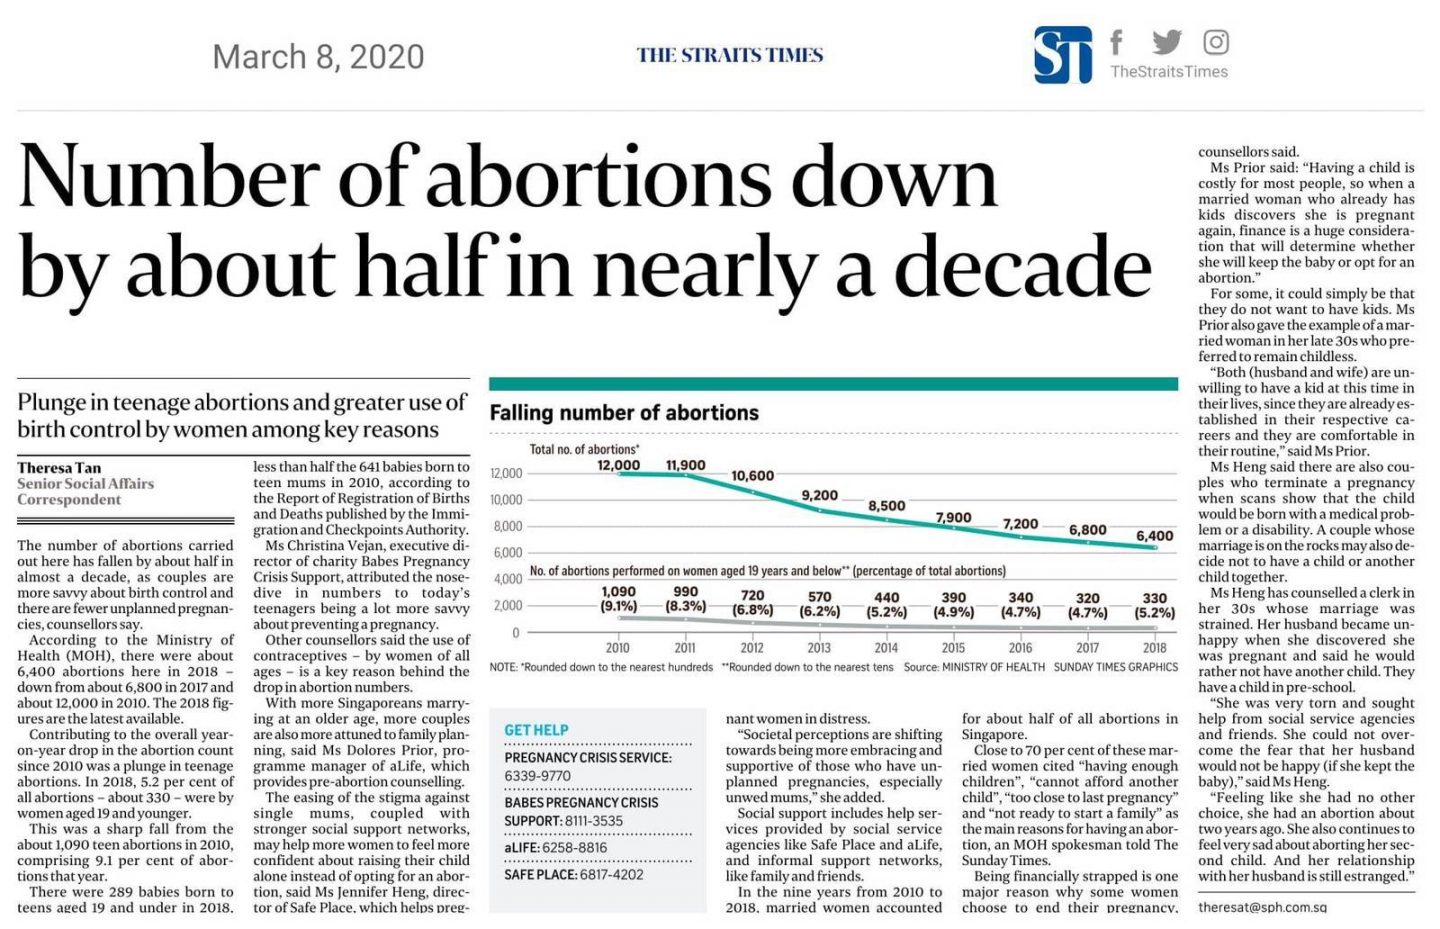 Even though the number of abortions have been down by about half in nearly a decade, that is still one life lost every 90 minutes.